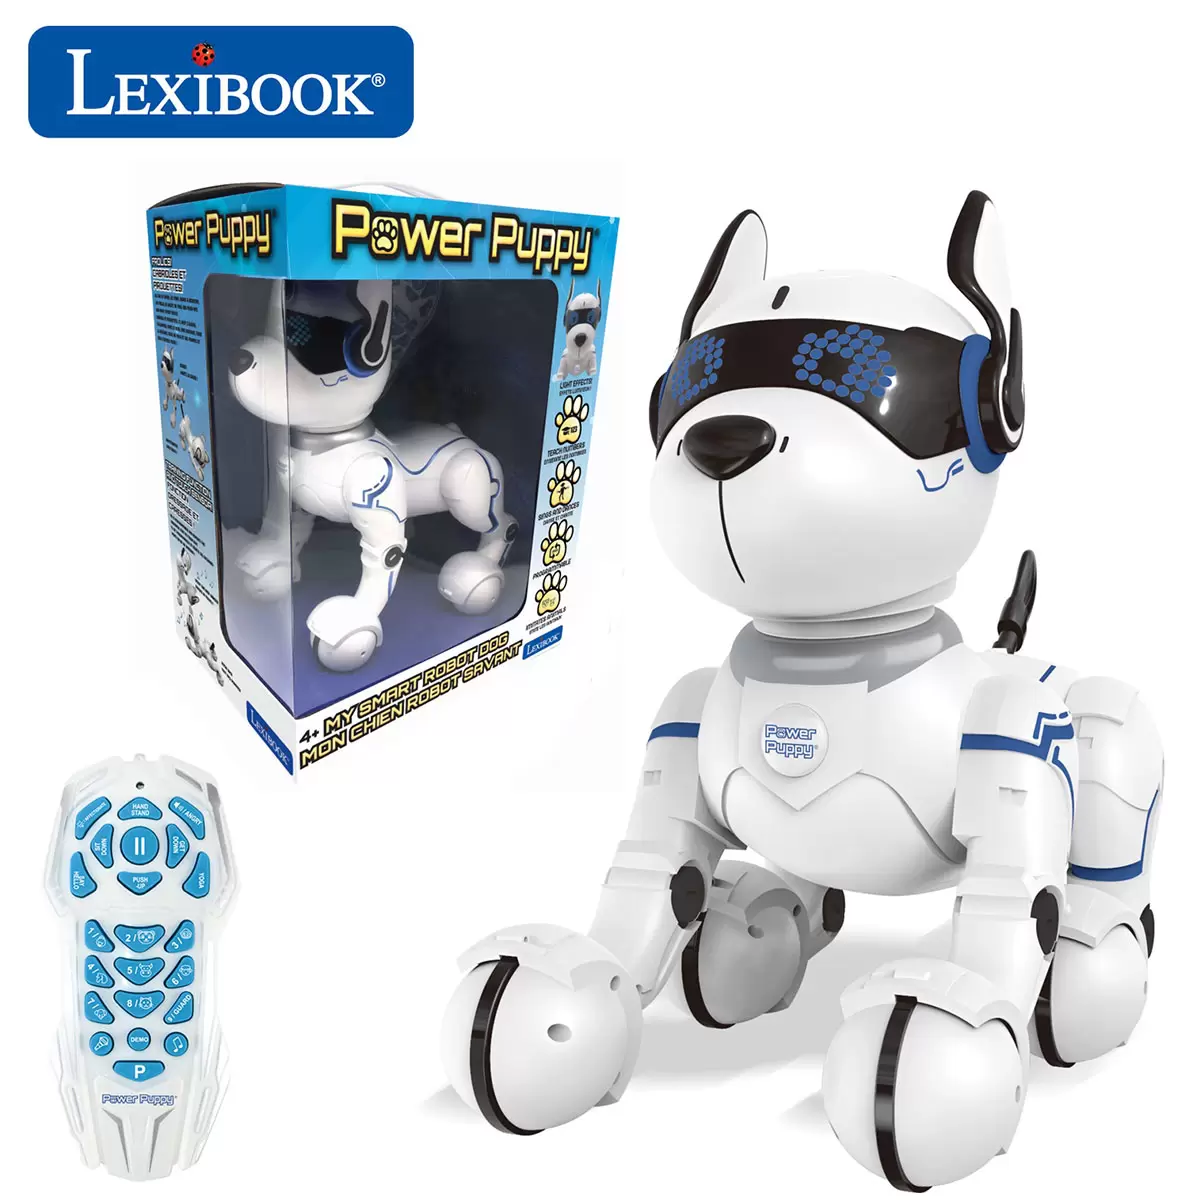 Rechargeable Battery Sings Programmable Robot with Remote Control My Smart Robot Dog Light Effects Training Function Dances Children's Toy LEXiBOOK Power Puppy DOG01BK 